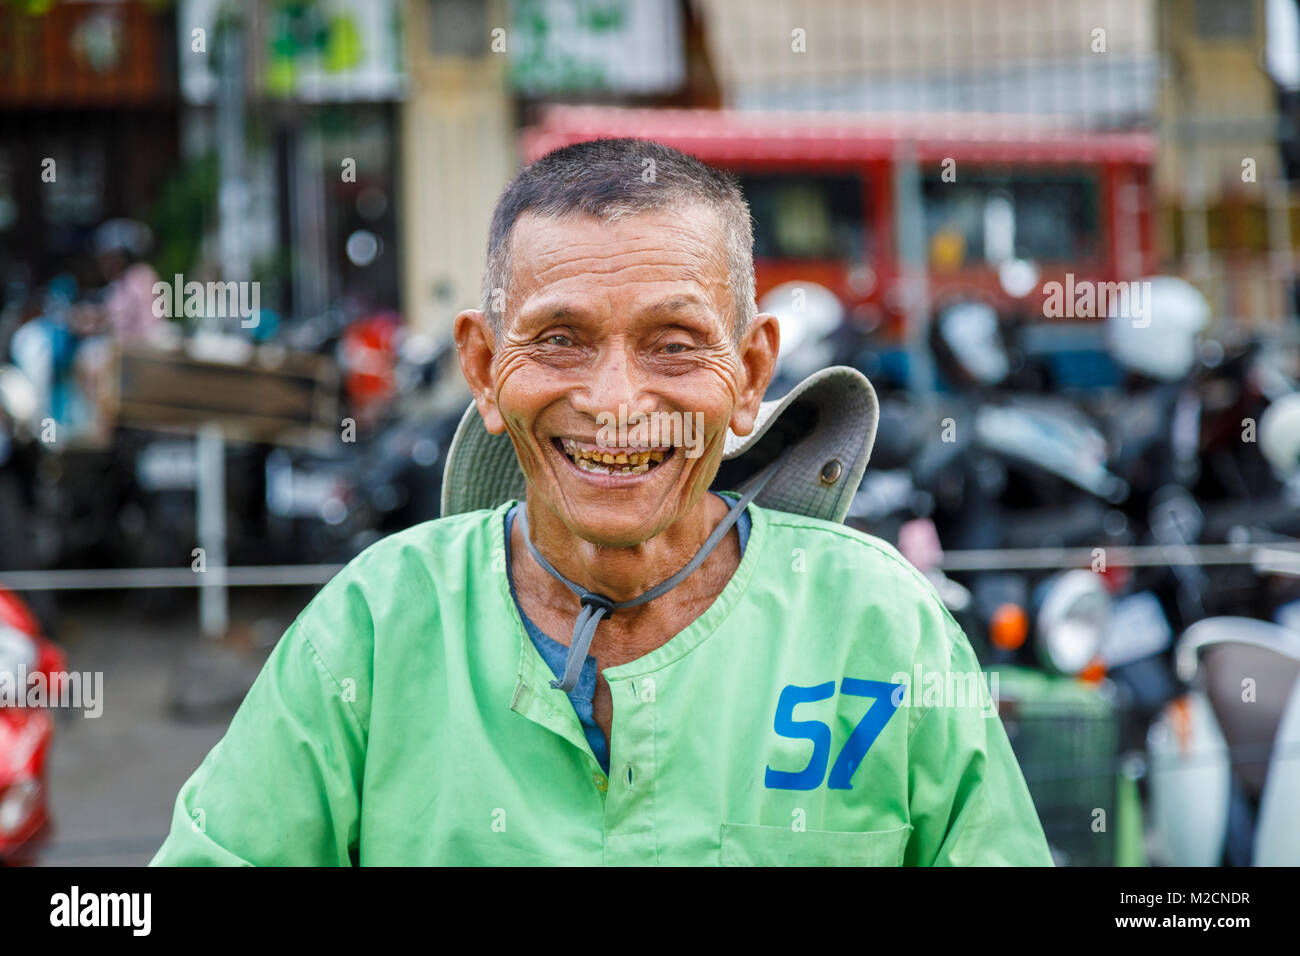 Happiness: joyful, friendly local Cambodian Cyclo City Tour cycle rickshaw driver with bad teeth in a green shirt in Phnom Penh, capital of Cambodia Stock Photo